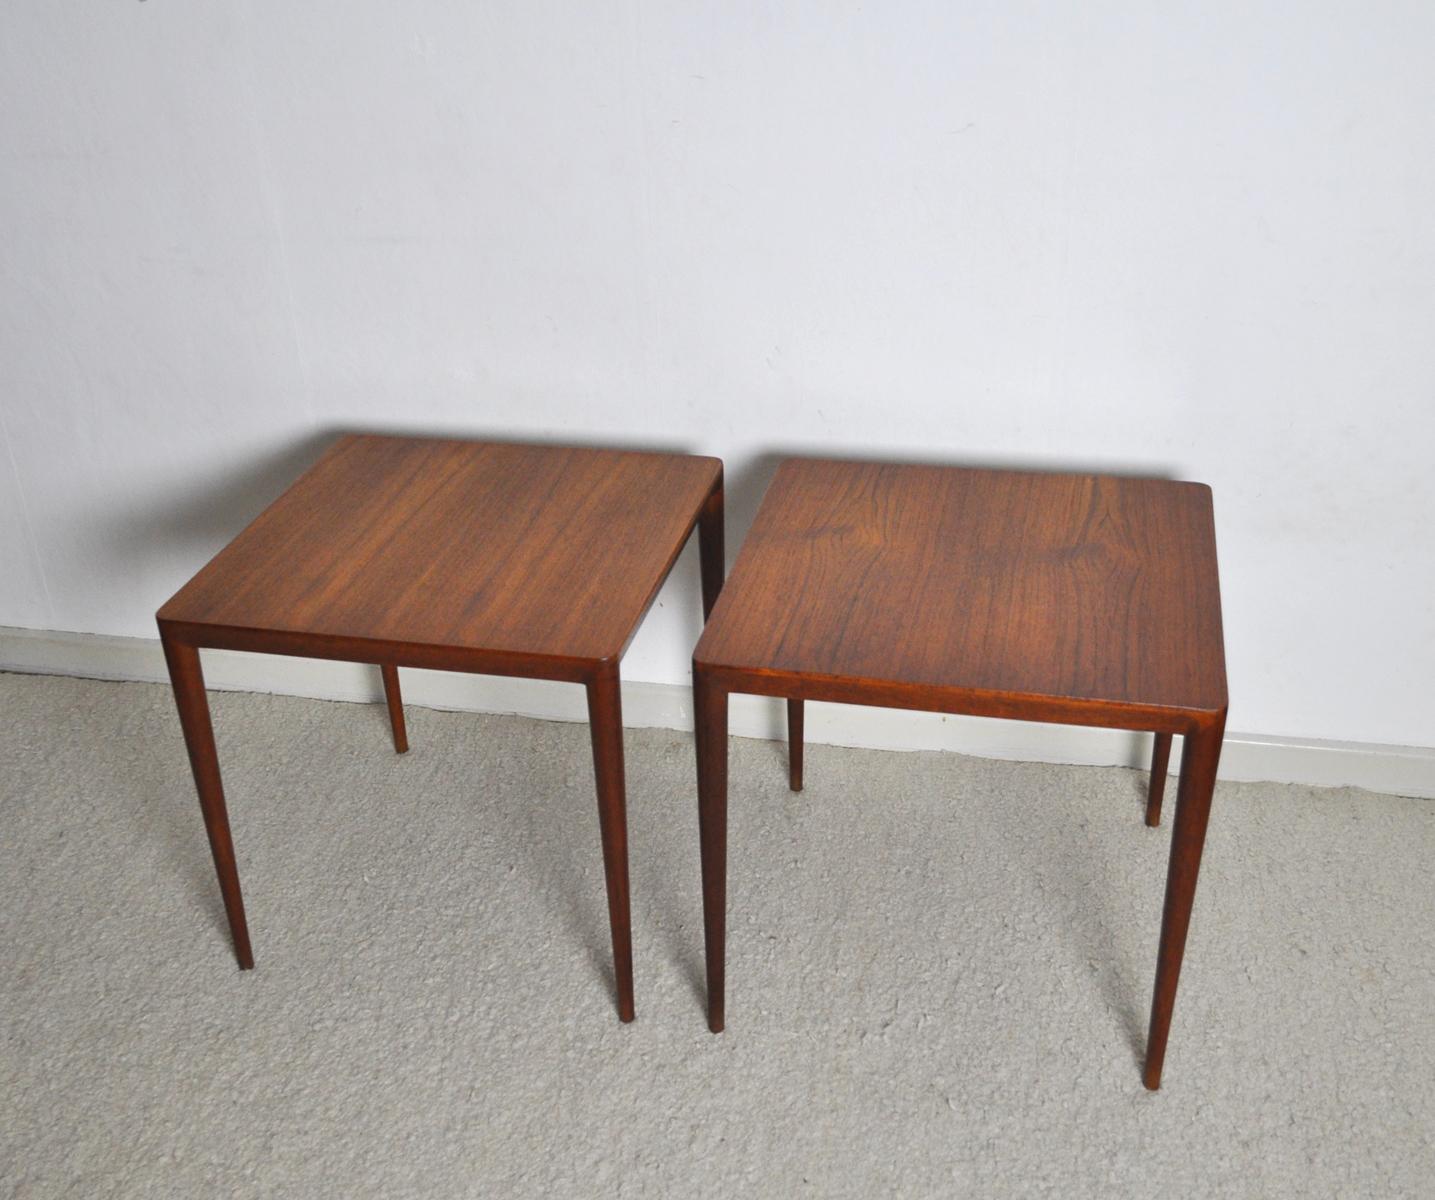 Rare pair of teak side tables characterized by the wonderful pointed leg construction. Designed by Severin Hansen Jr. in the 1950s and manufactured by Haslev Møbelsnedkeri in the same period. Label by maker.

Good vintage condition, signs of wear